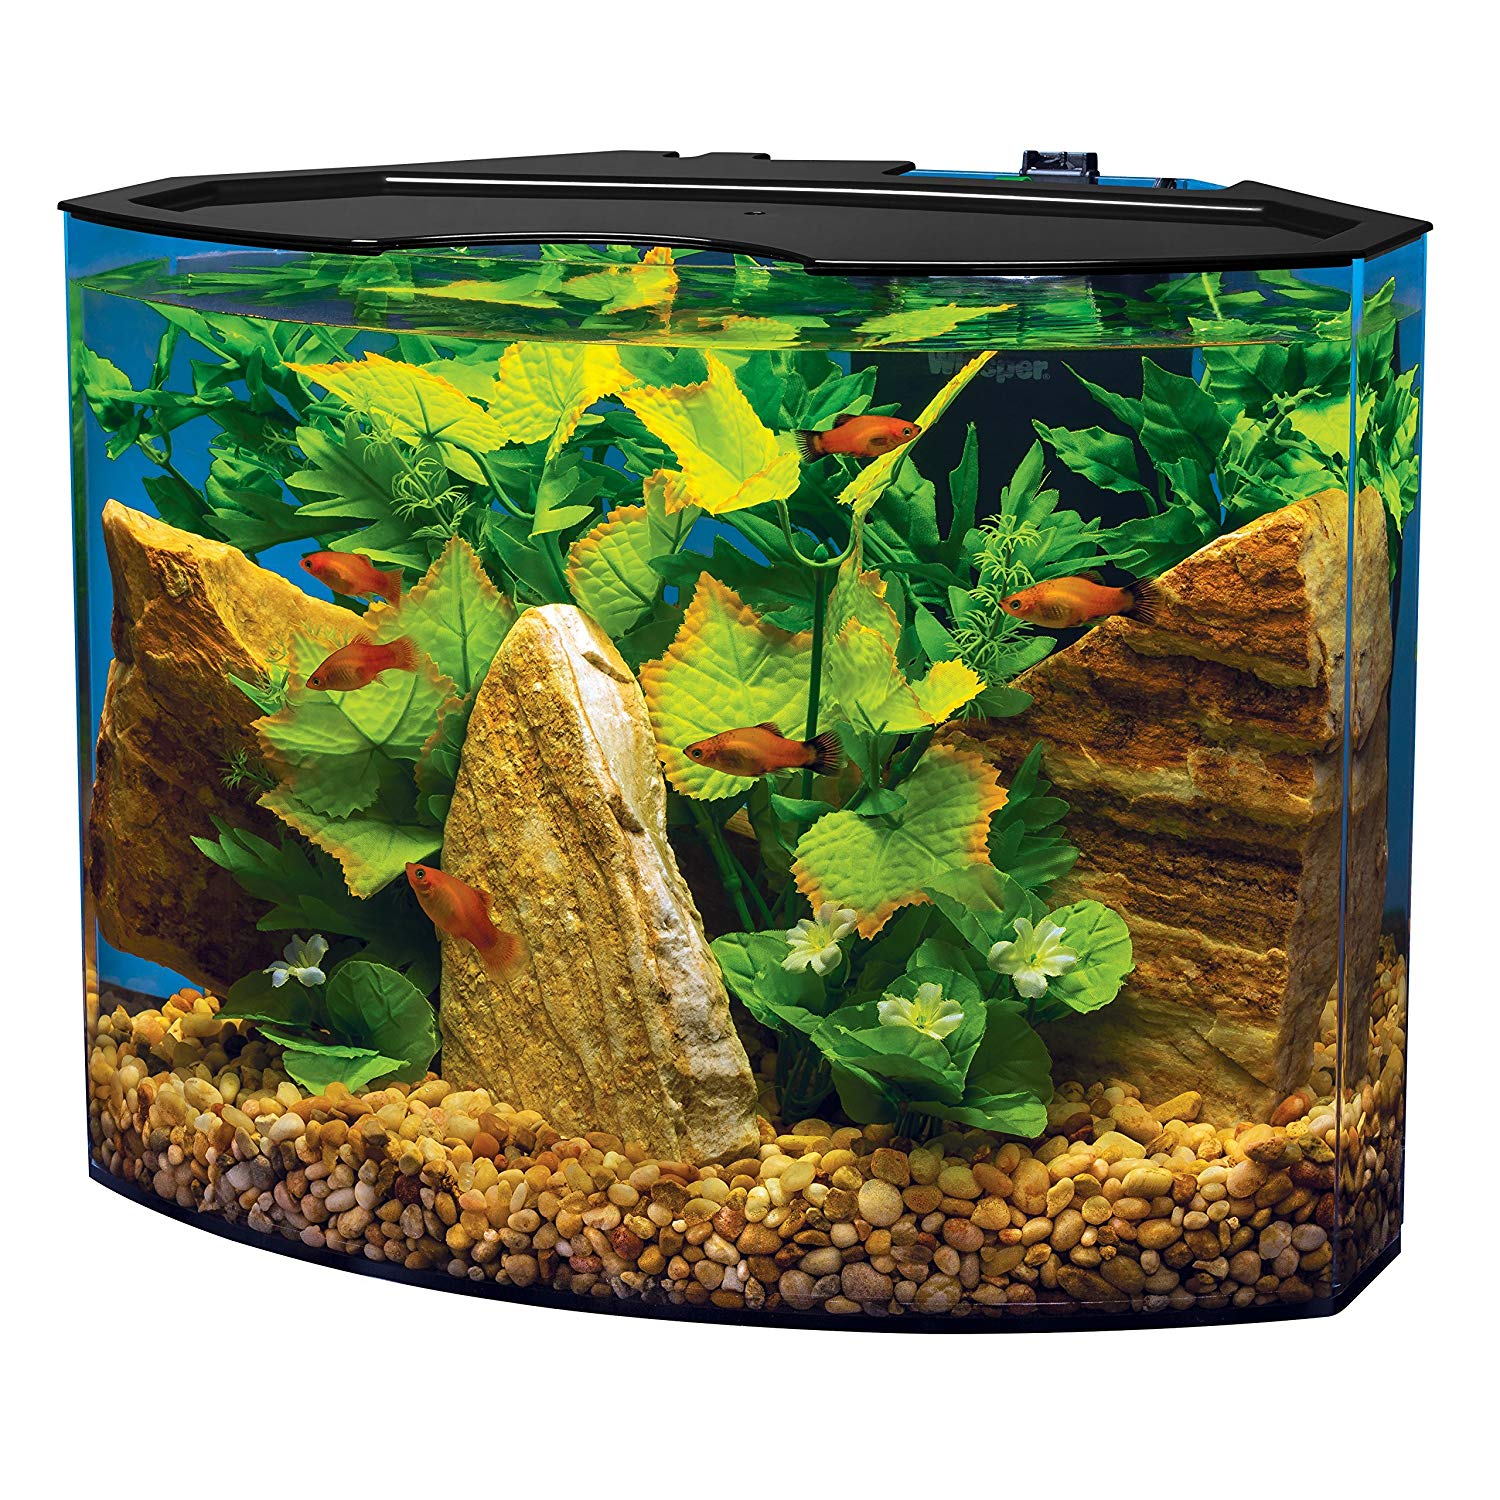 The Best Tank For Betta Fish Top 5 List - Stories Of Water